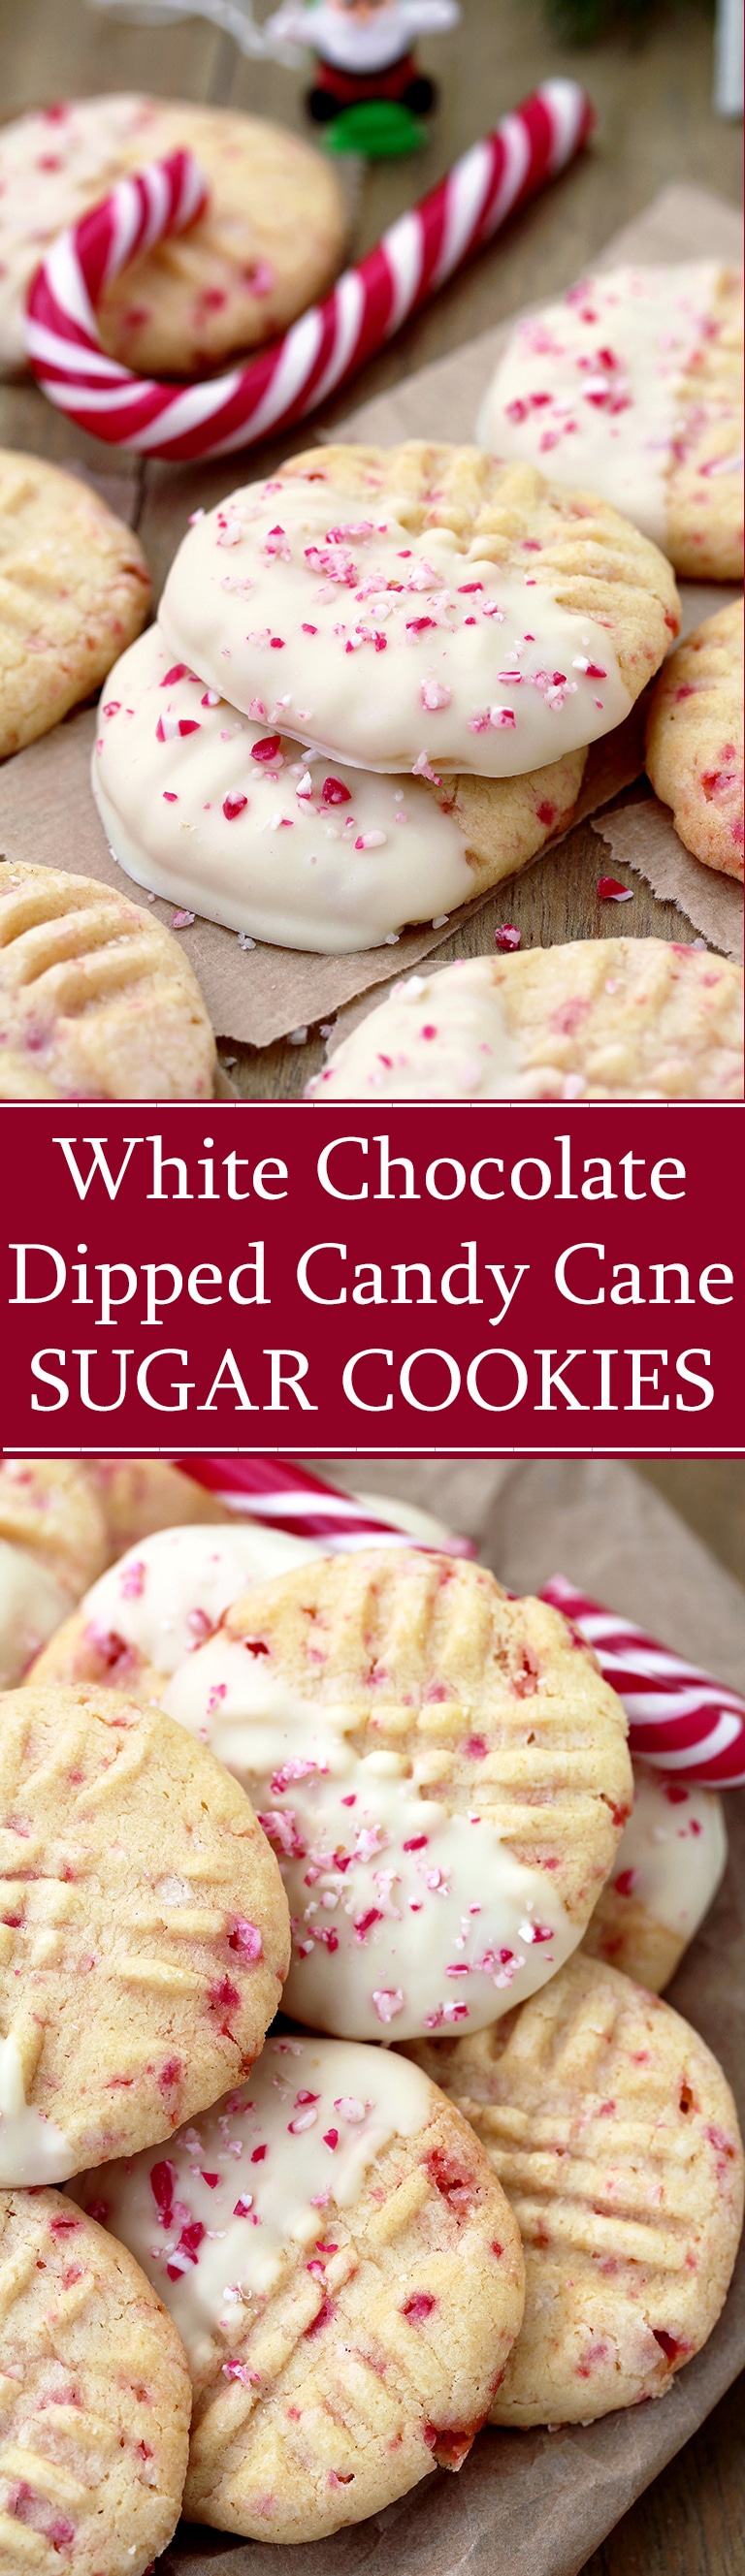 White Chocolate Dipped Candy Cane Sugar Cookies – delicious sugar cookies, just perfect for Christmas. They are easy to make and melt in your mouth. HO HO HO.. Christmas is coming and that makes me so happy.